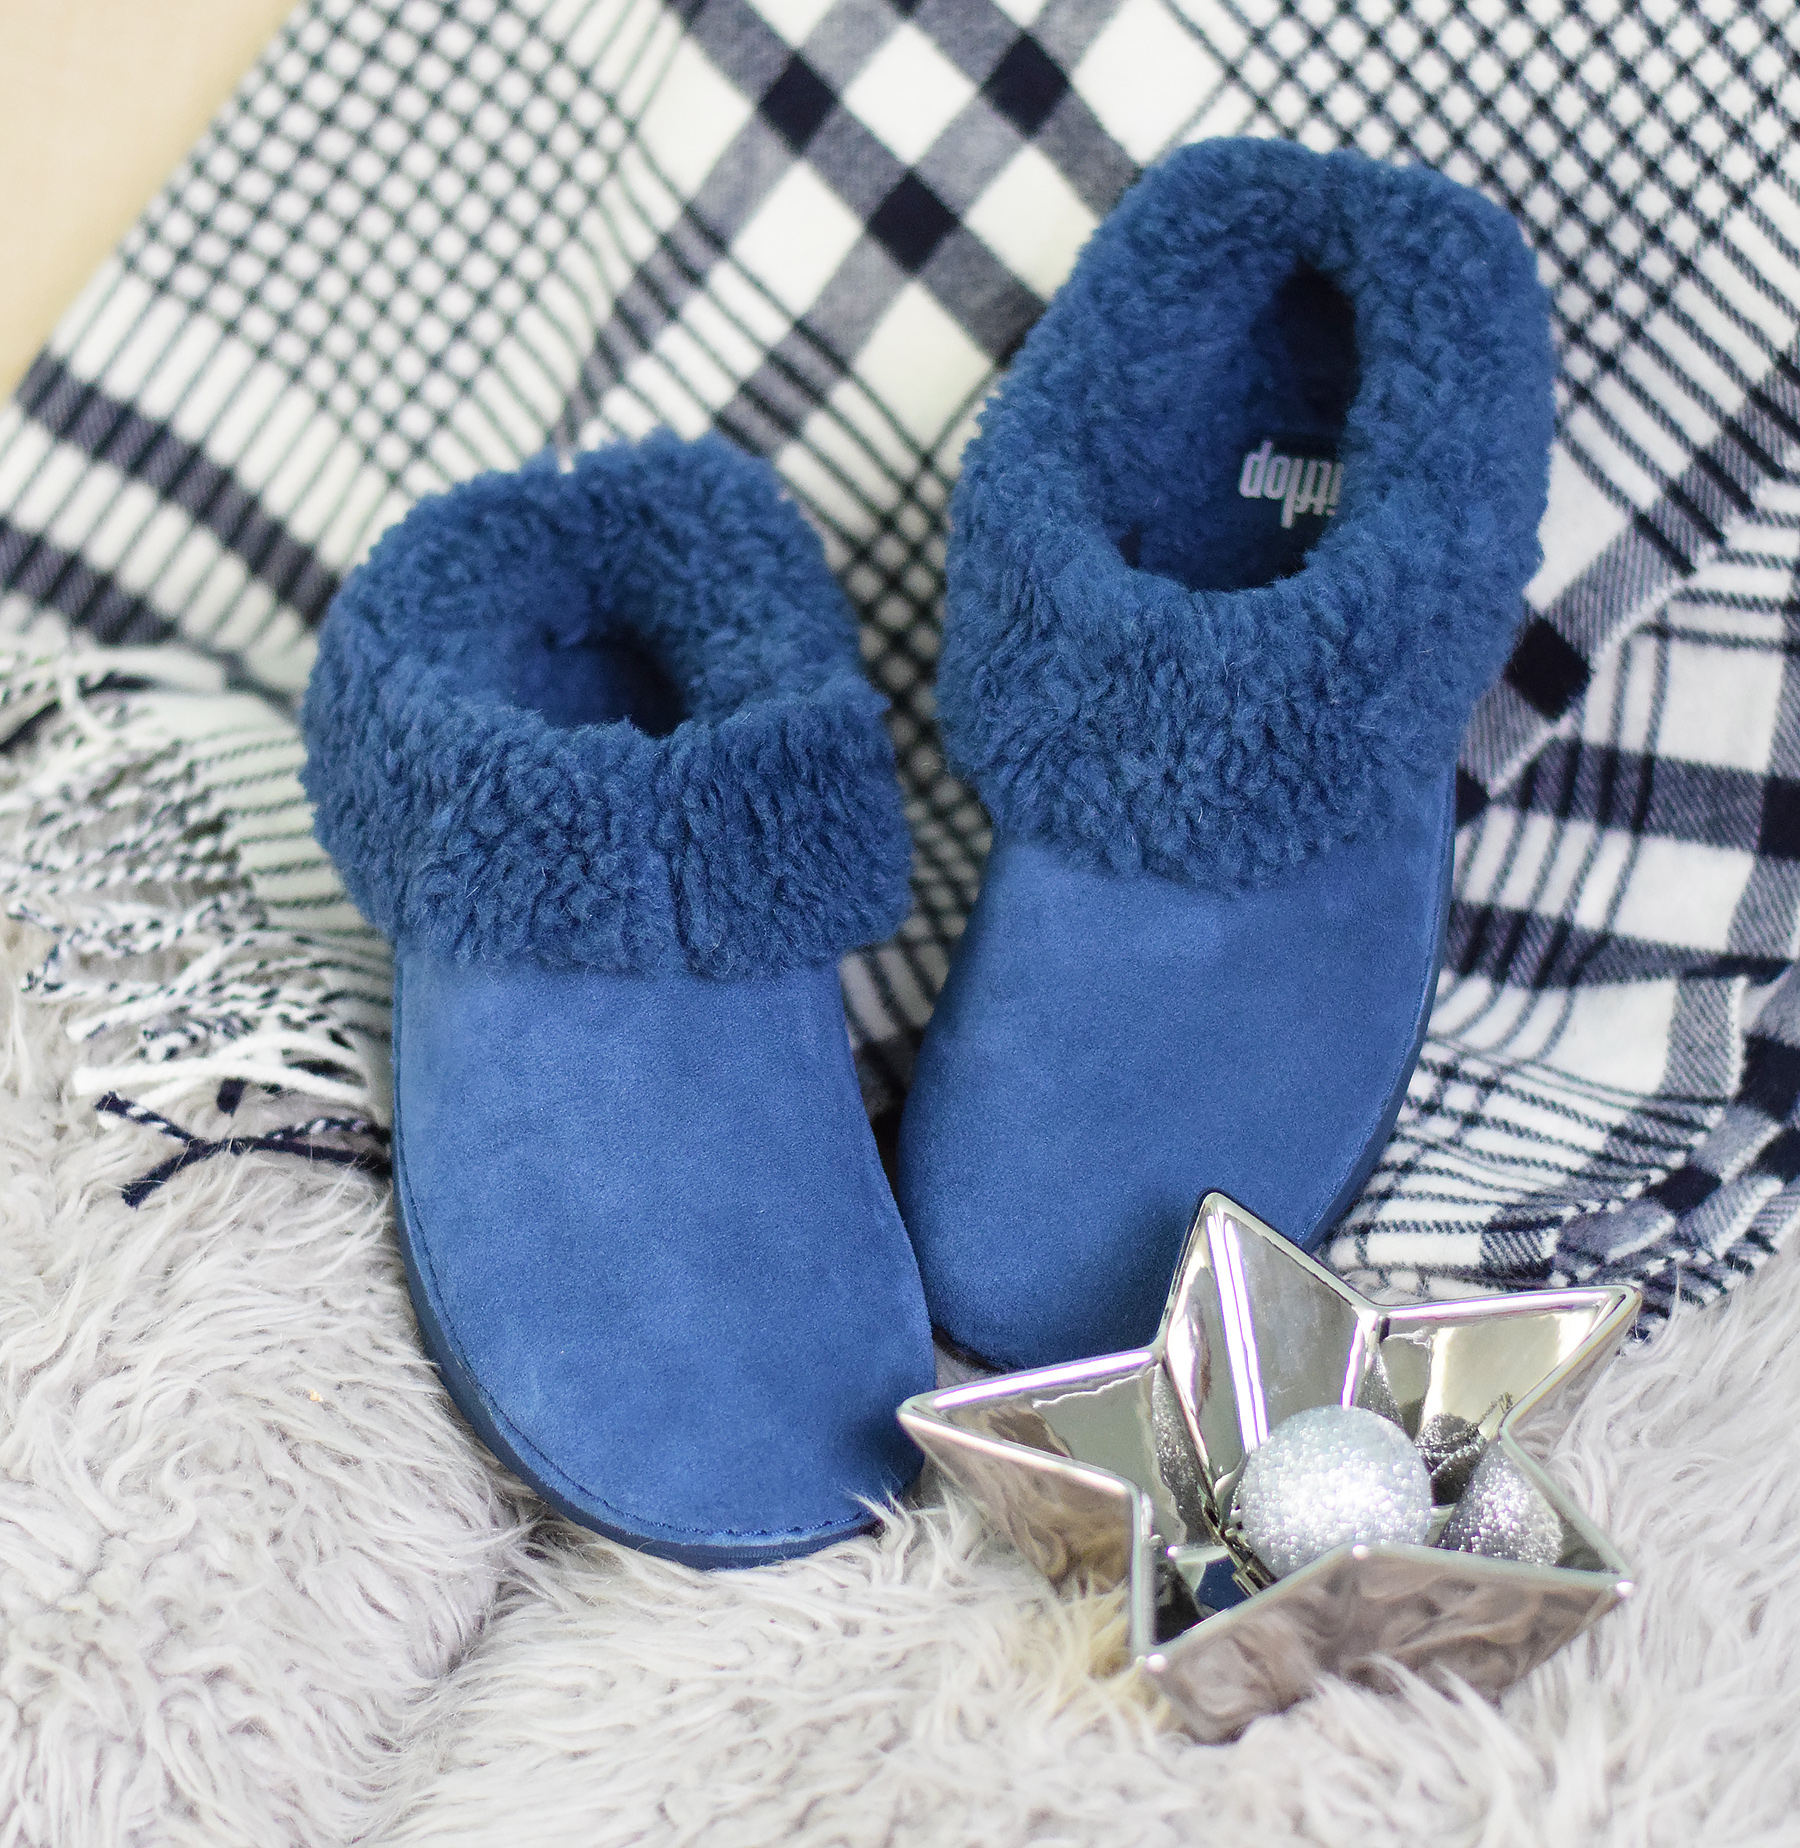 FITFLOP LOAFF SNUG SUEDE SLIPPERS - MIDNIGHT NAVY 